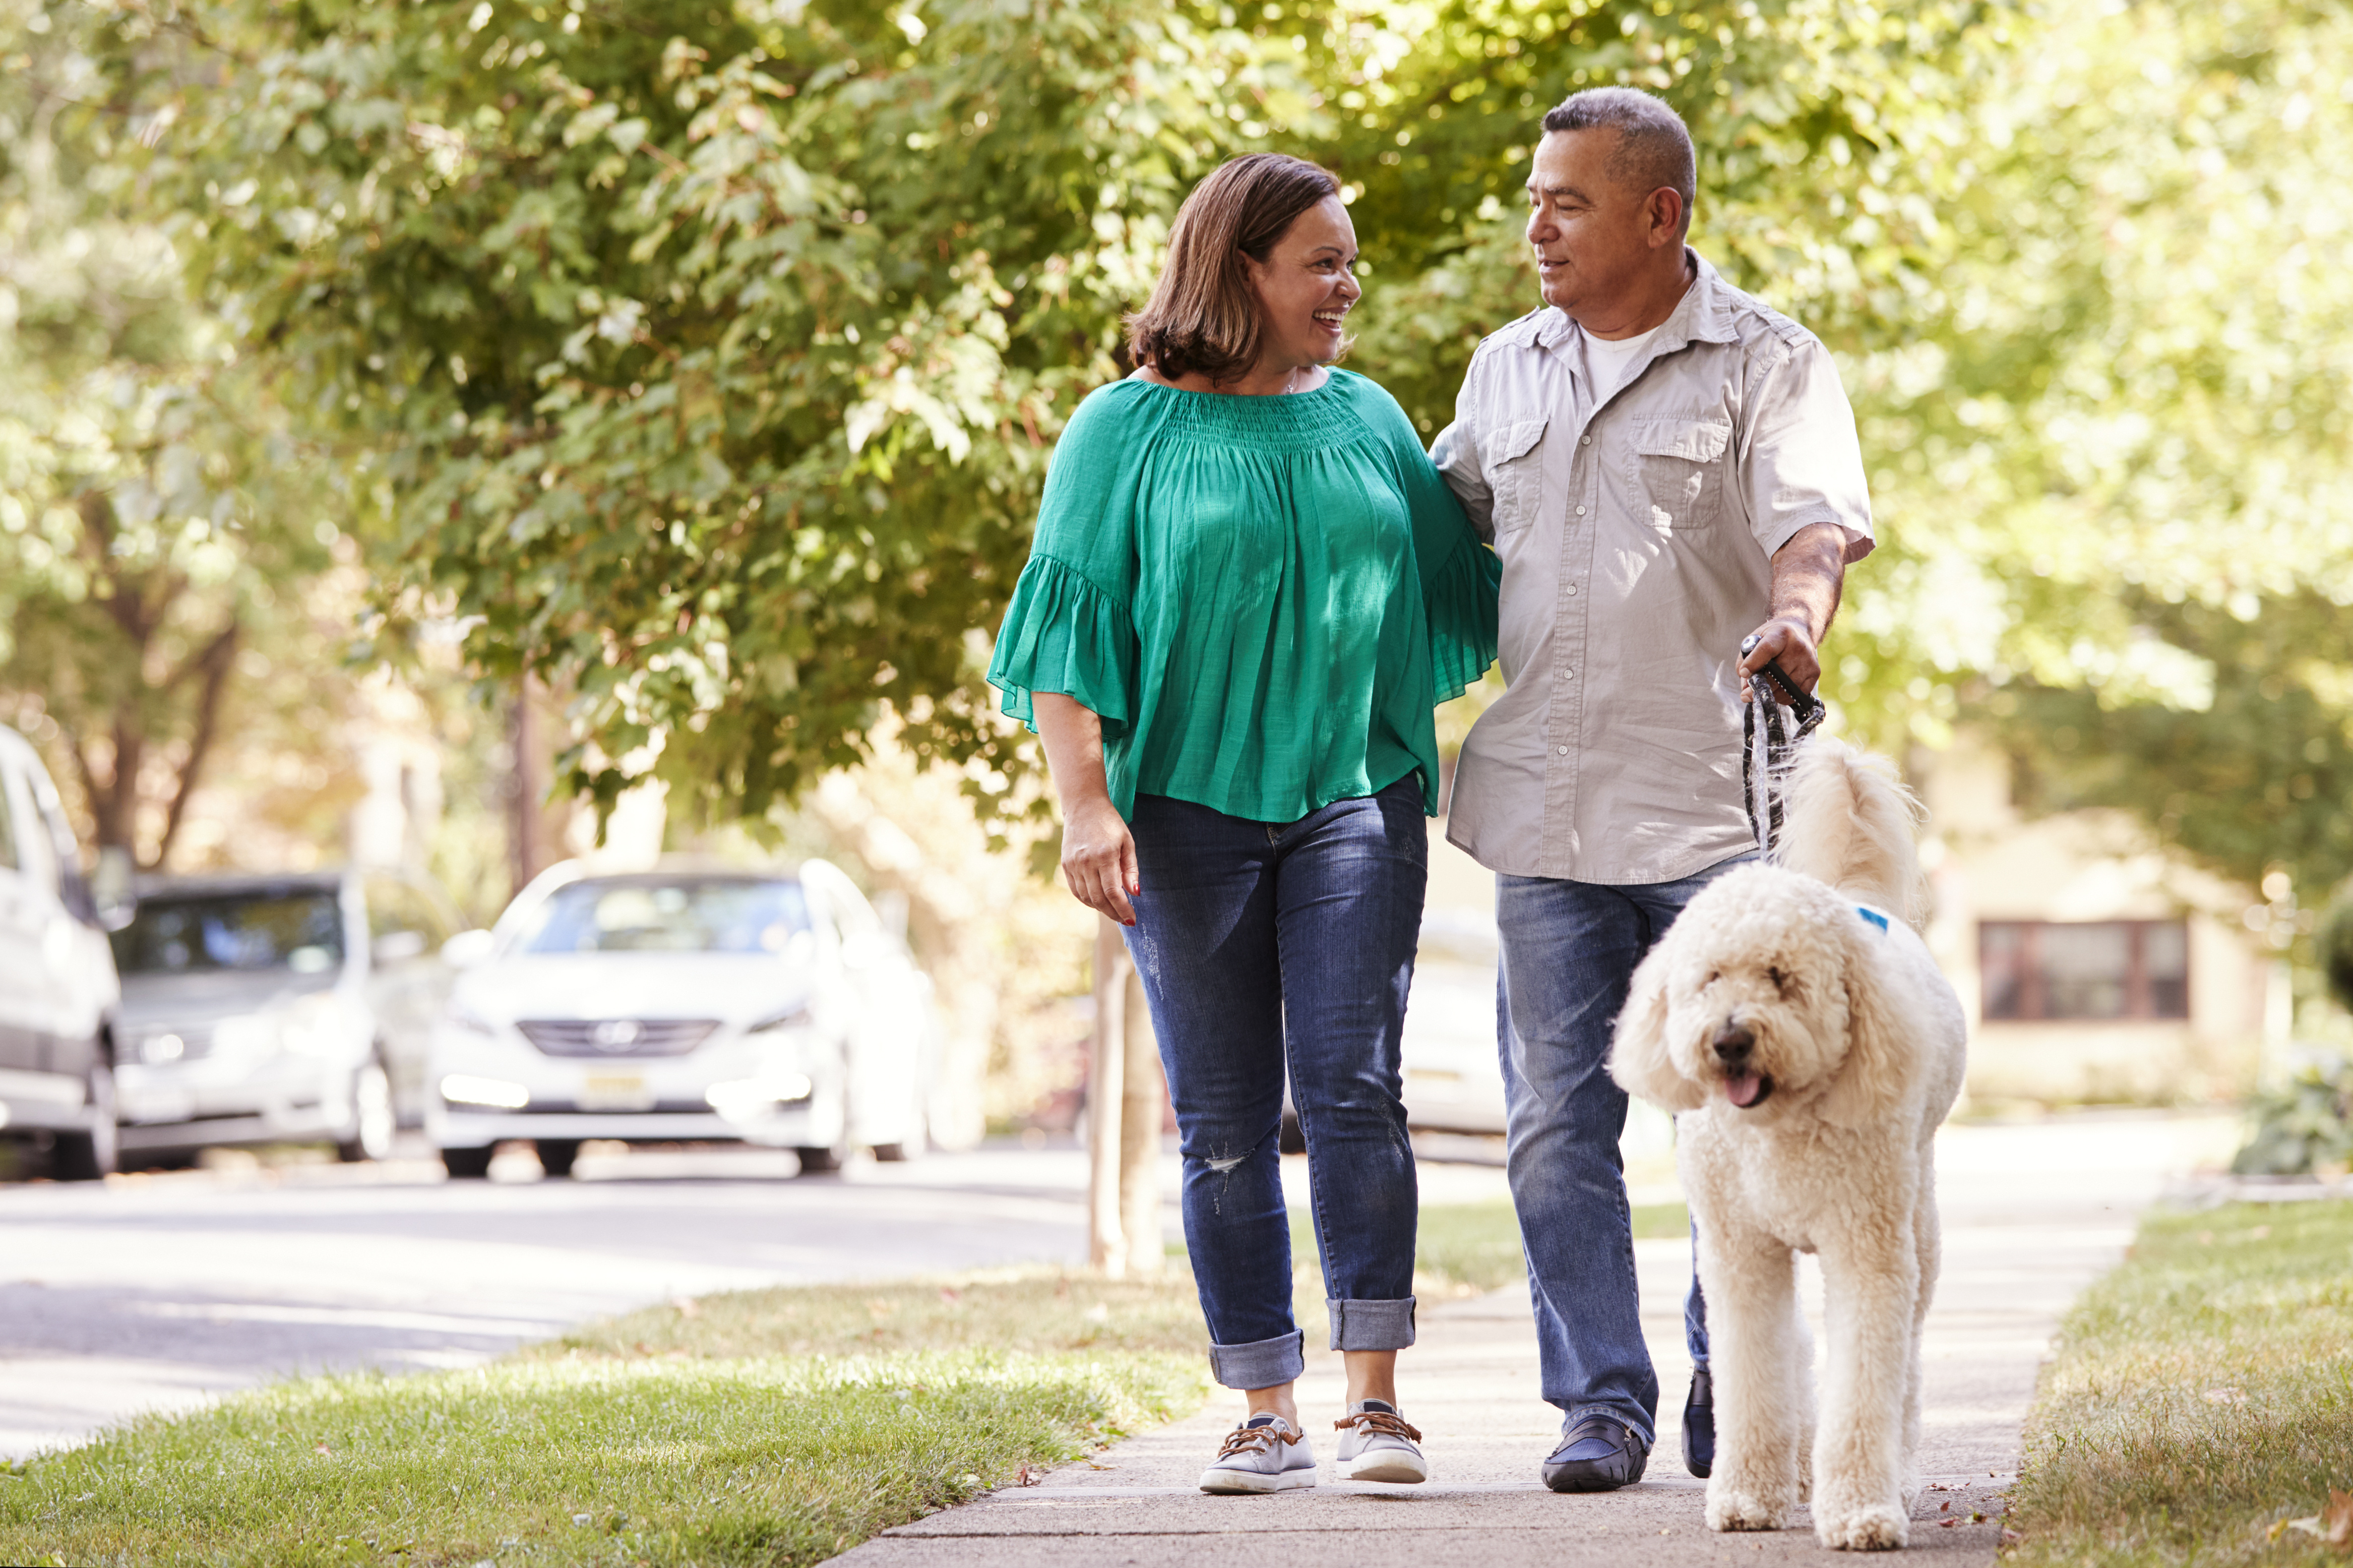 husband and wife with dog - When Should You Start Colon Cancer Screenings?